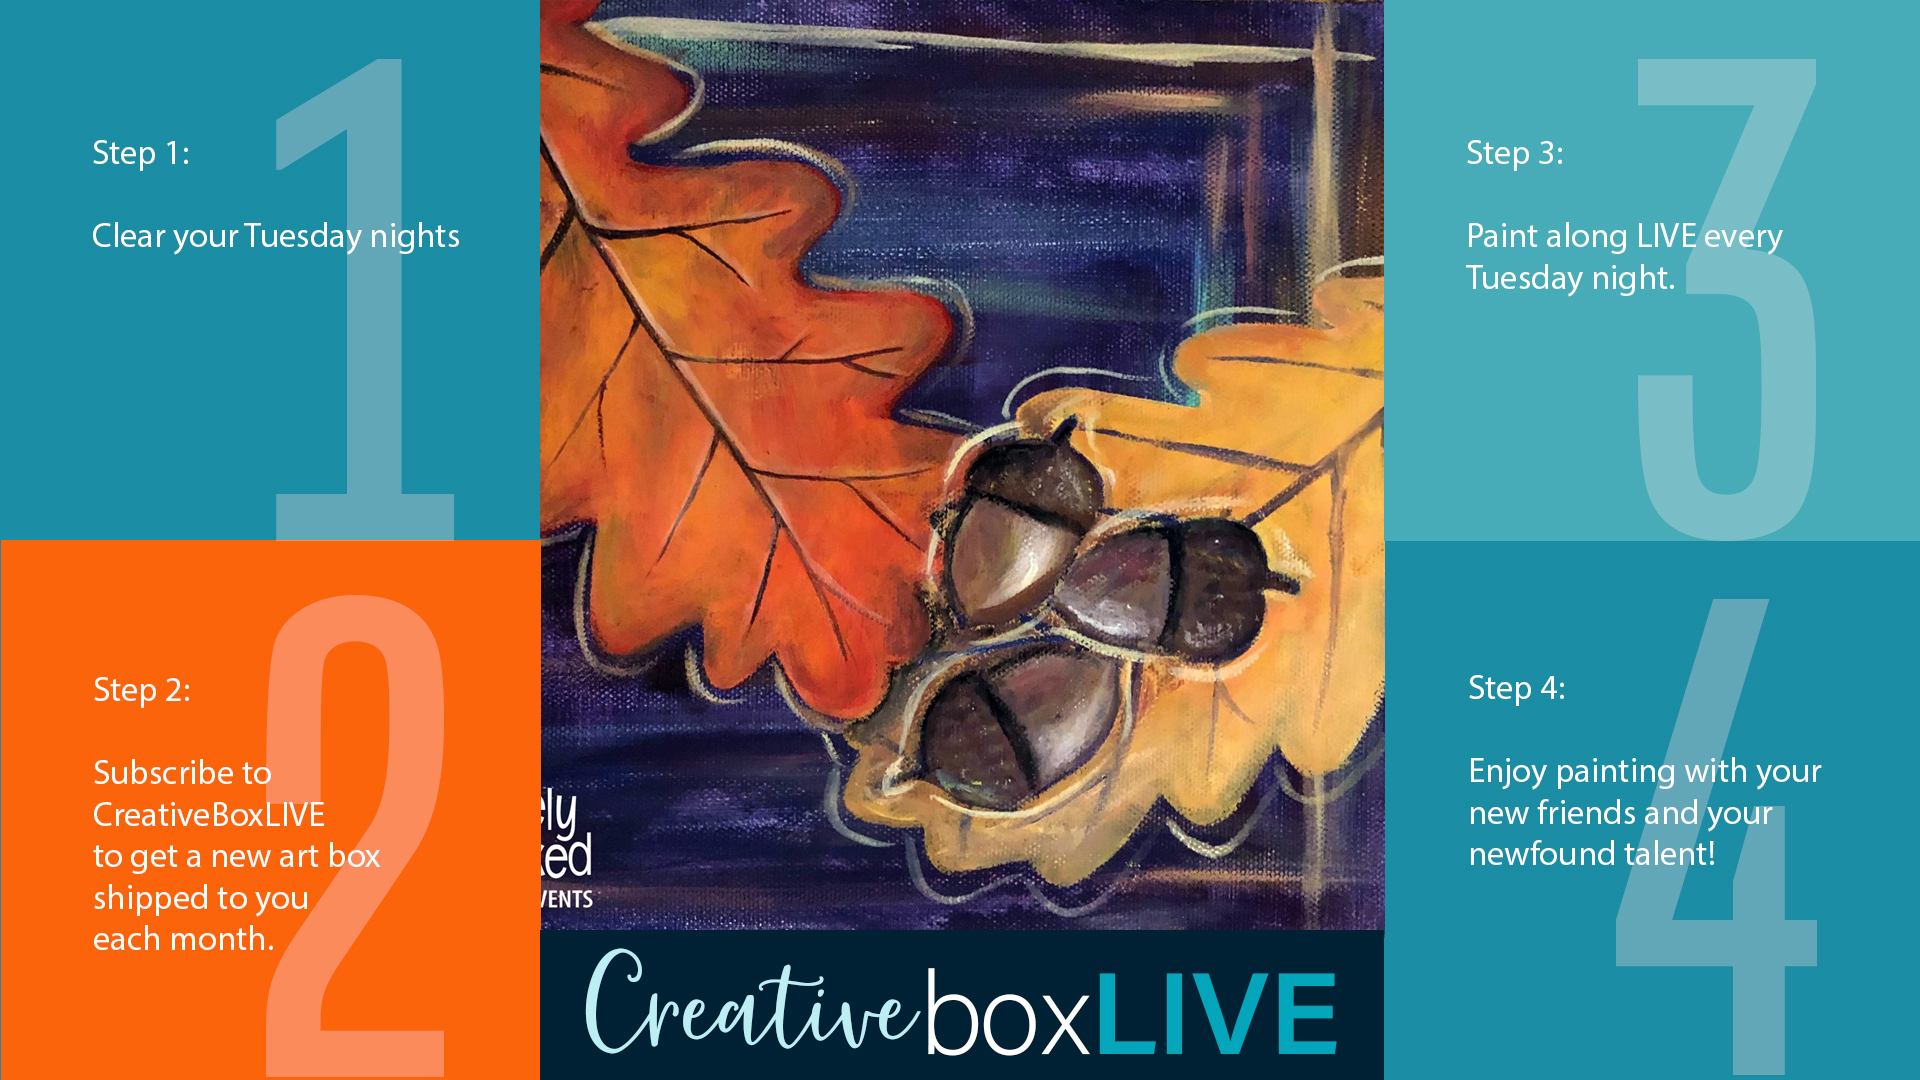 Fall Oak CBL with CreativeBoxLIVE from Creatively Uncorked http://creativelyuncorked.com/